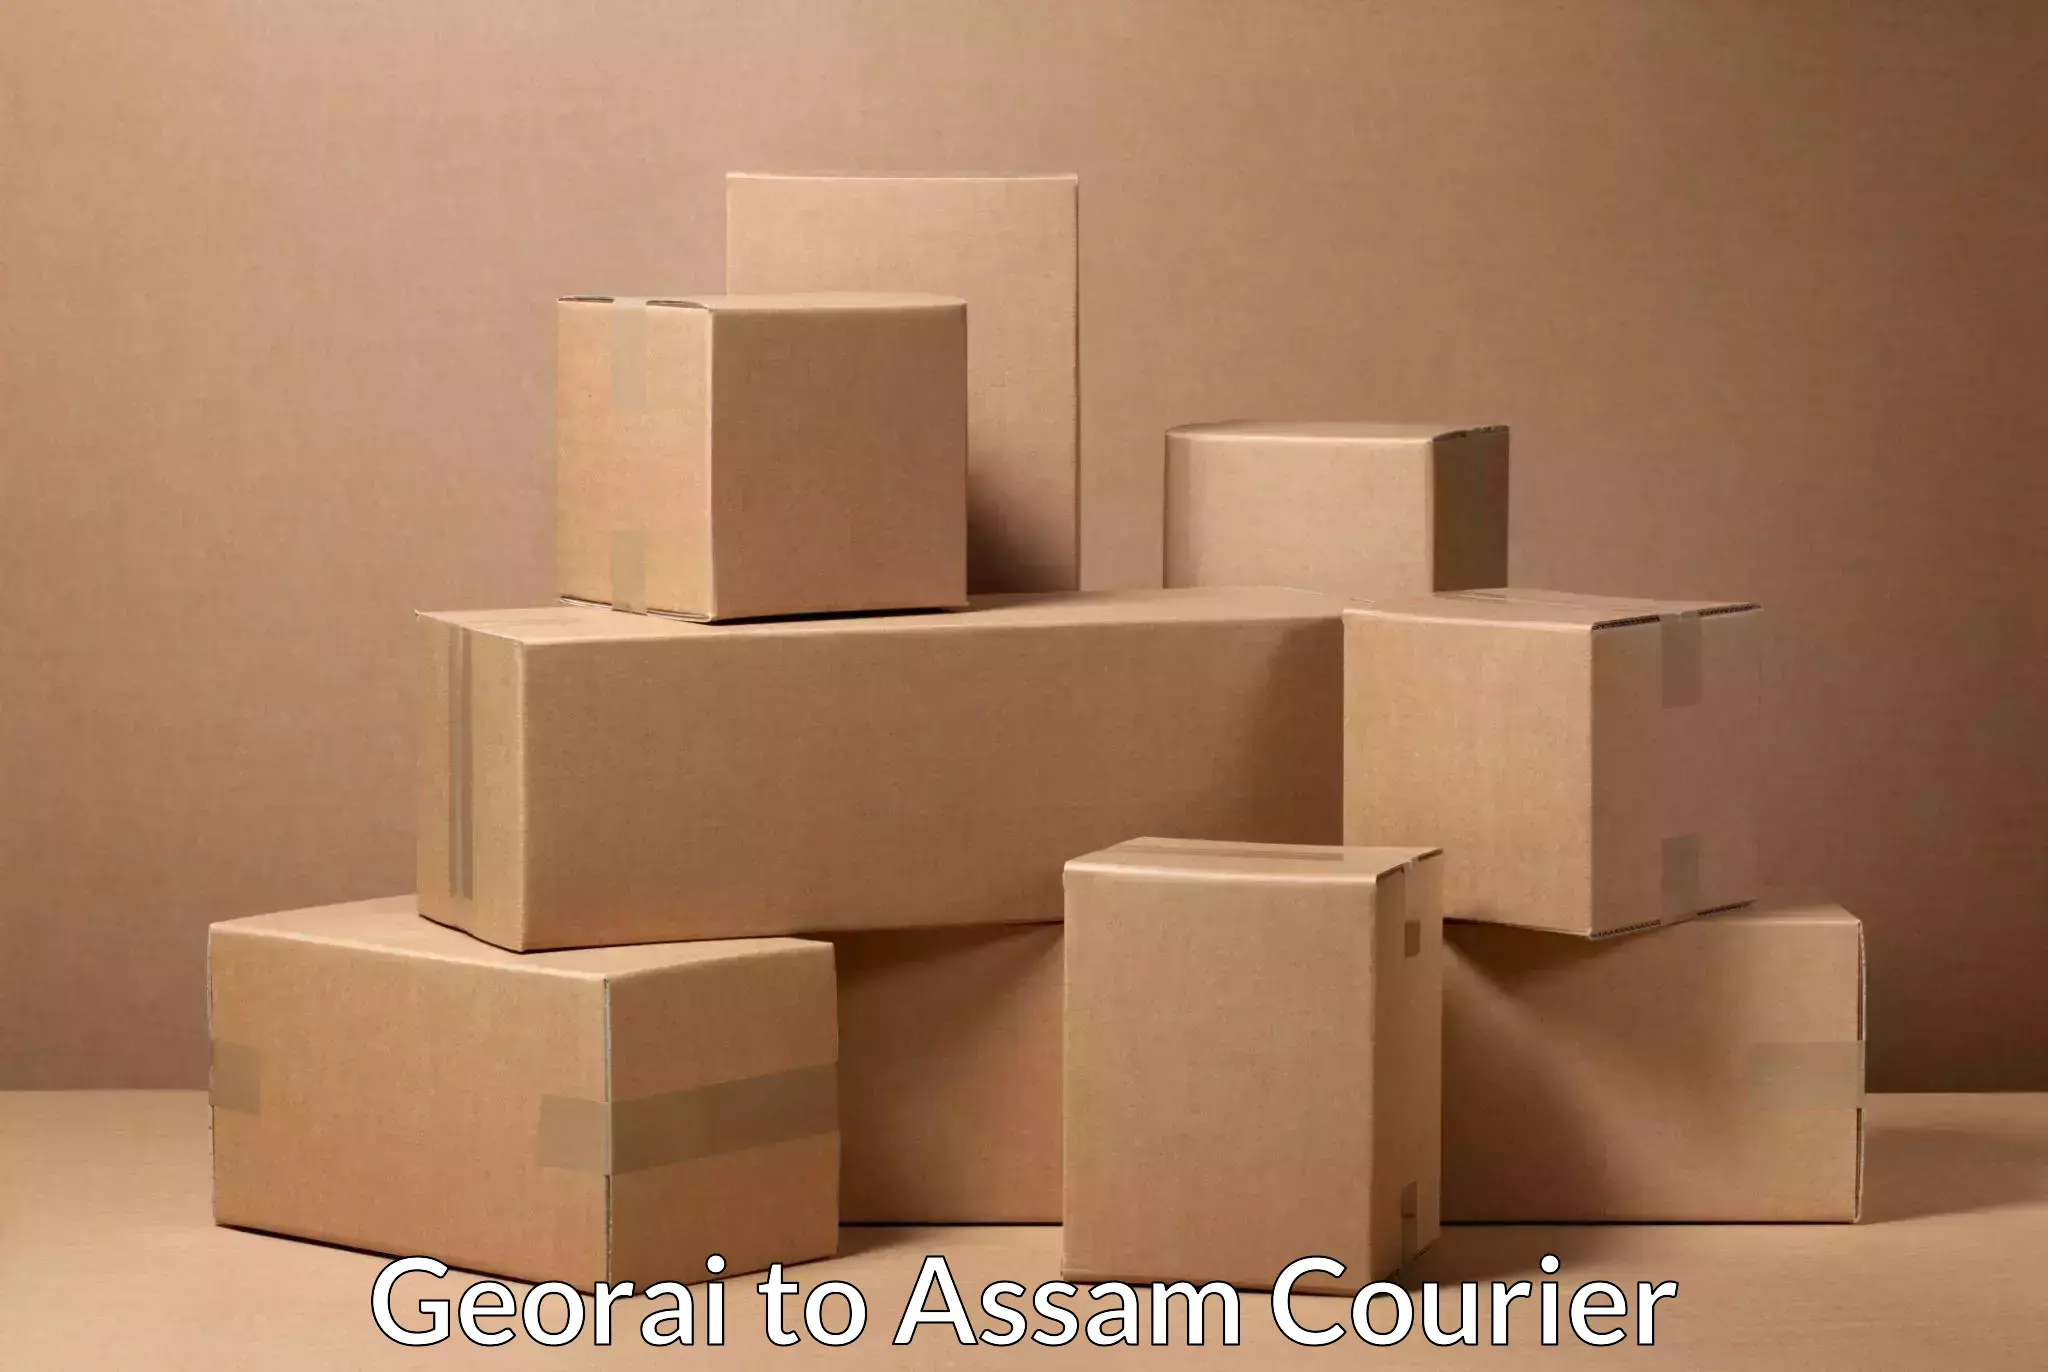 Efficient package consolidation Georai to Assam